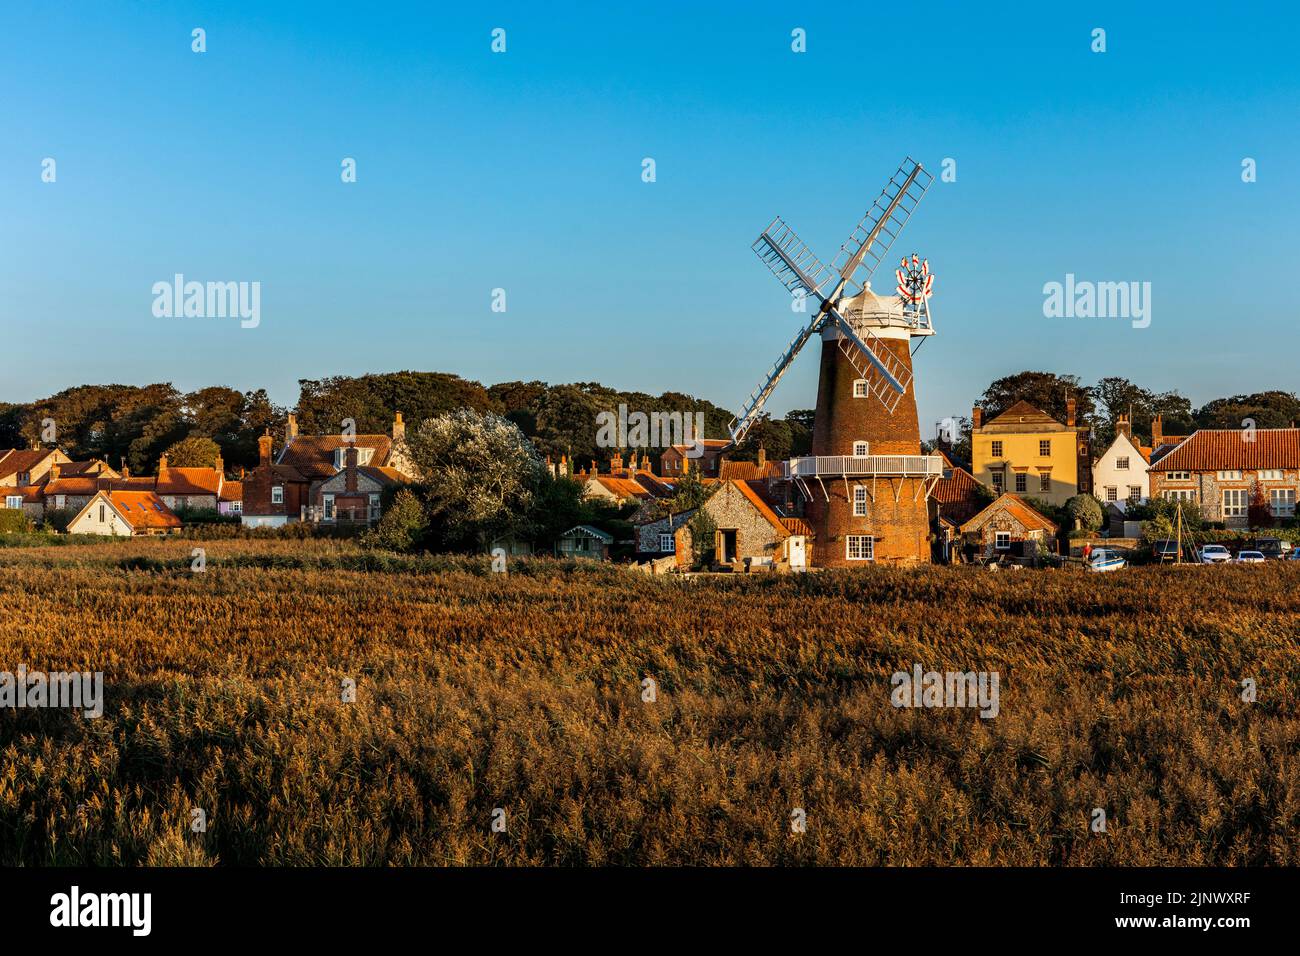 CLEY Windmill; Norfolk; Royaume-Uni Banque D'Images